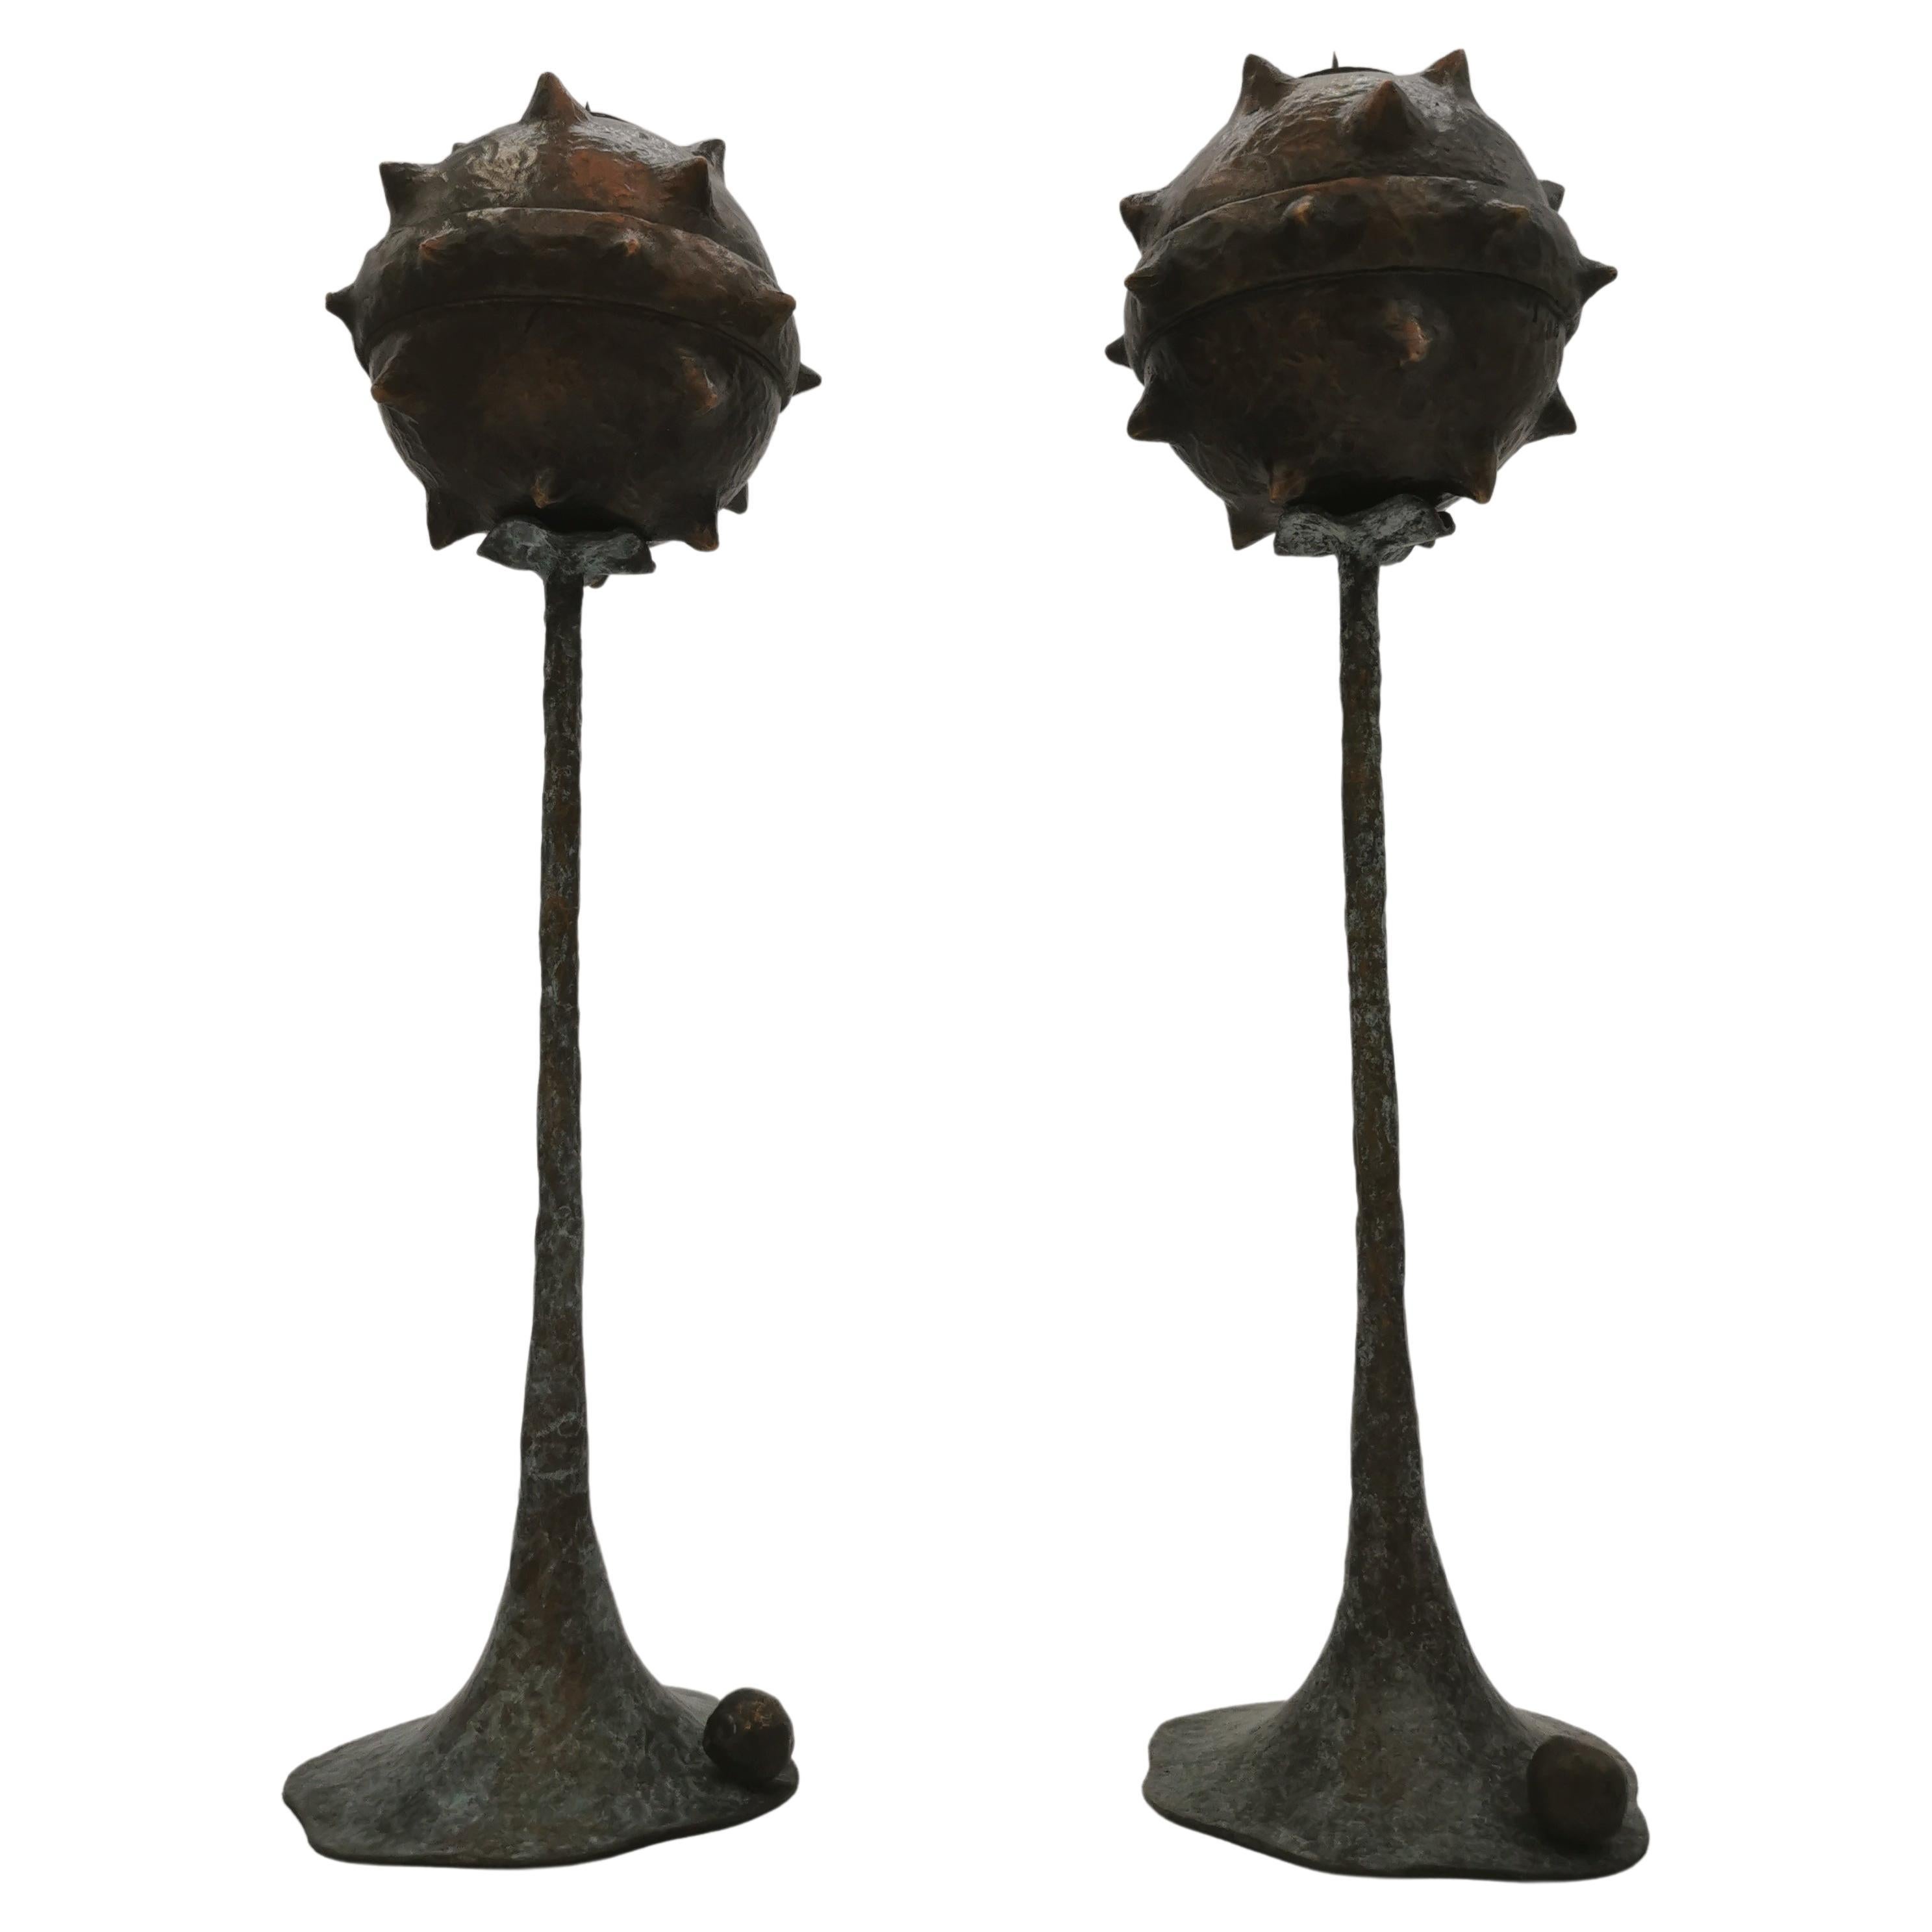 Set of two bronze candlesticks by Emanuele Colombi.
Limited Edition 
Roma Collection 2022 Primus Small 

Materials: bronze
Finishes: Base Vert de Gris Patine + Globe Petite Jaune Patine (VG+PJP) (Number 1 of 12)

Various finishes and sizes